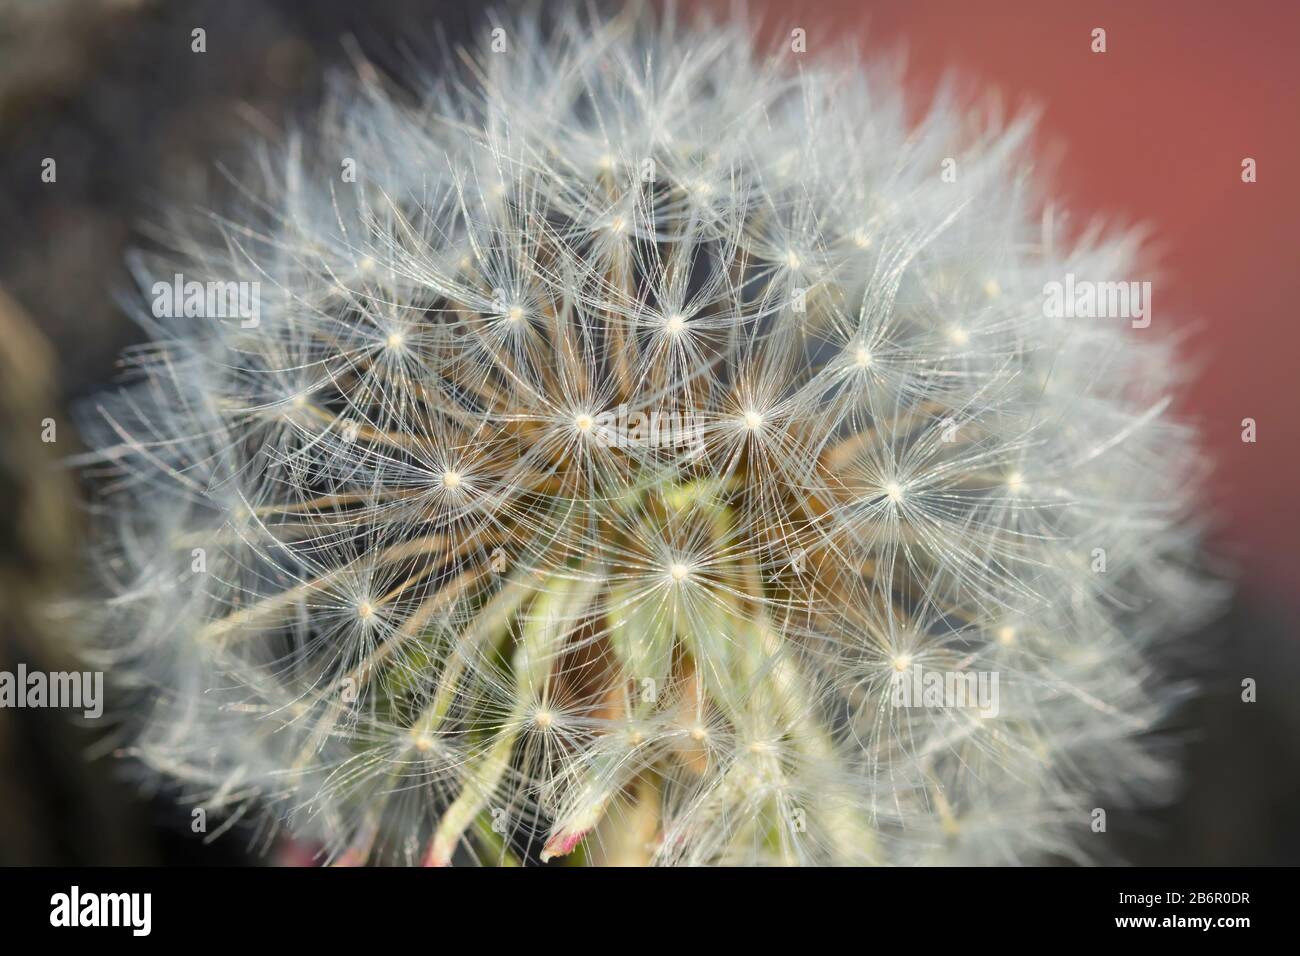 Blooming dandelion. Close-up of white fluff. Stock Photo